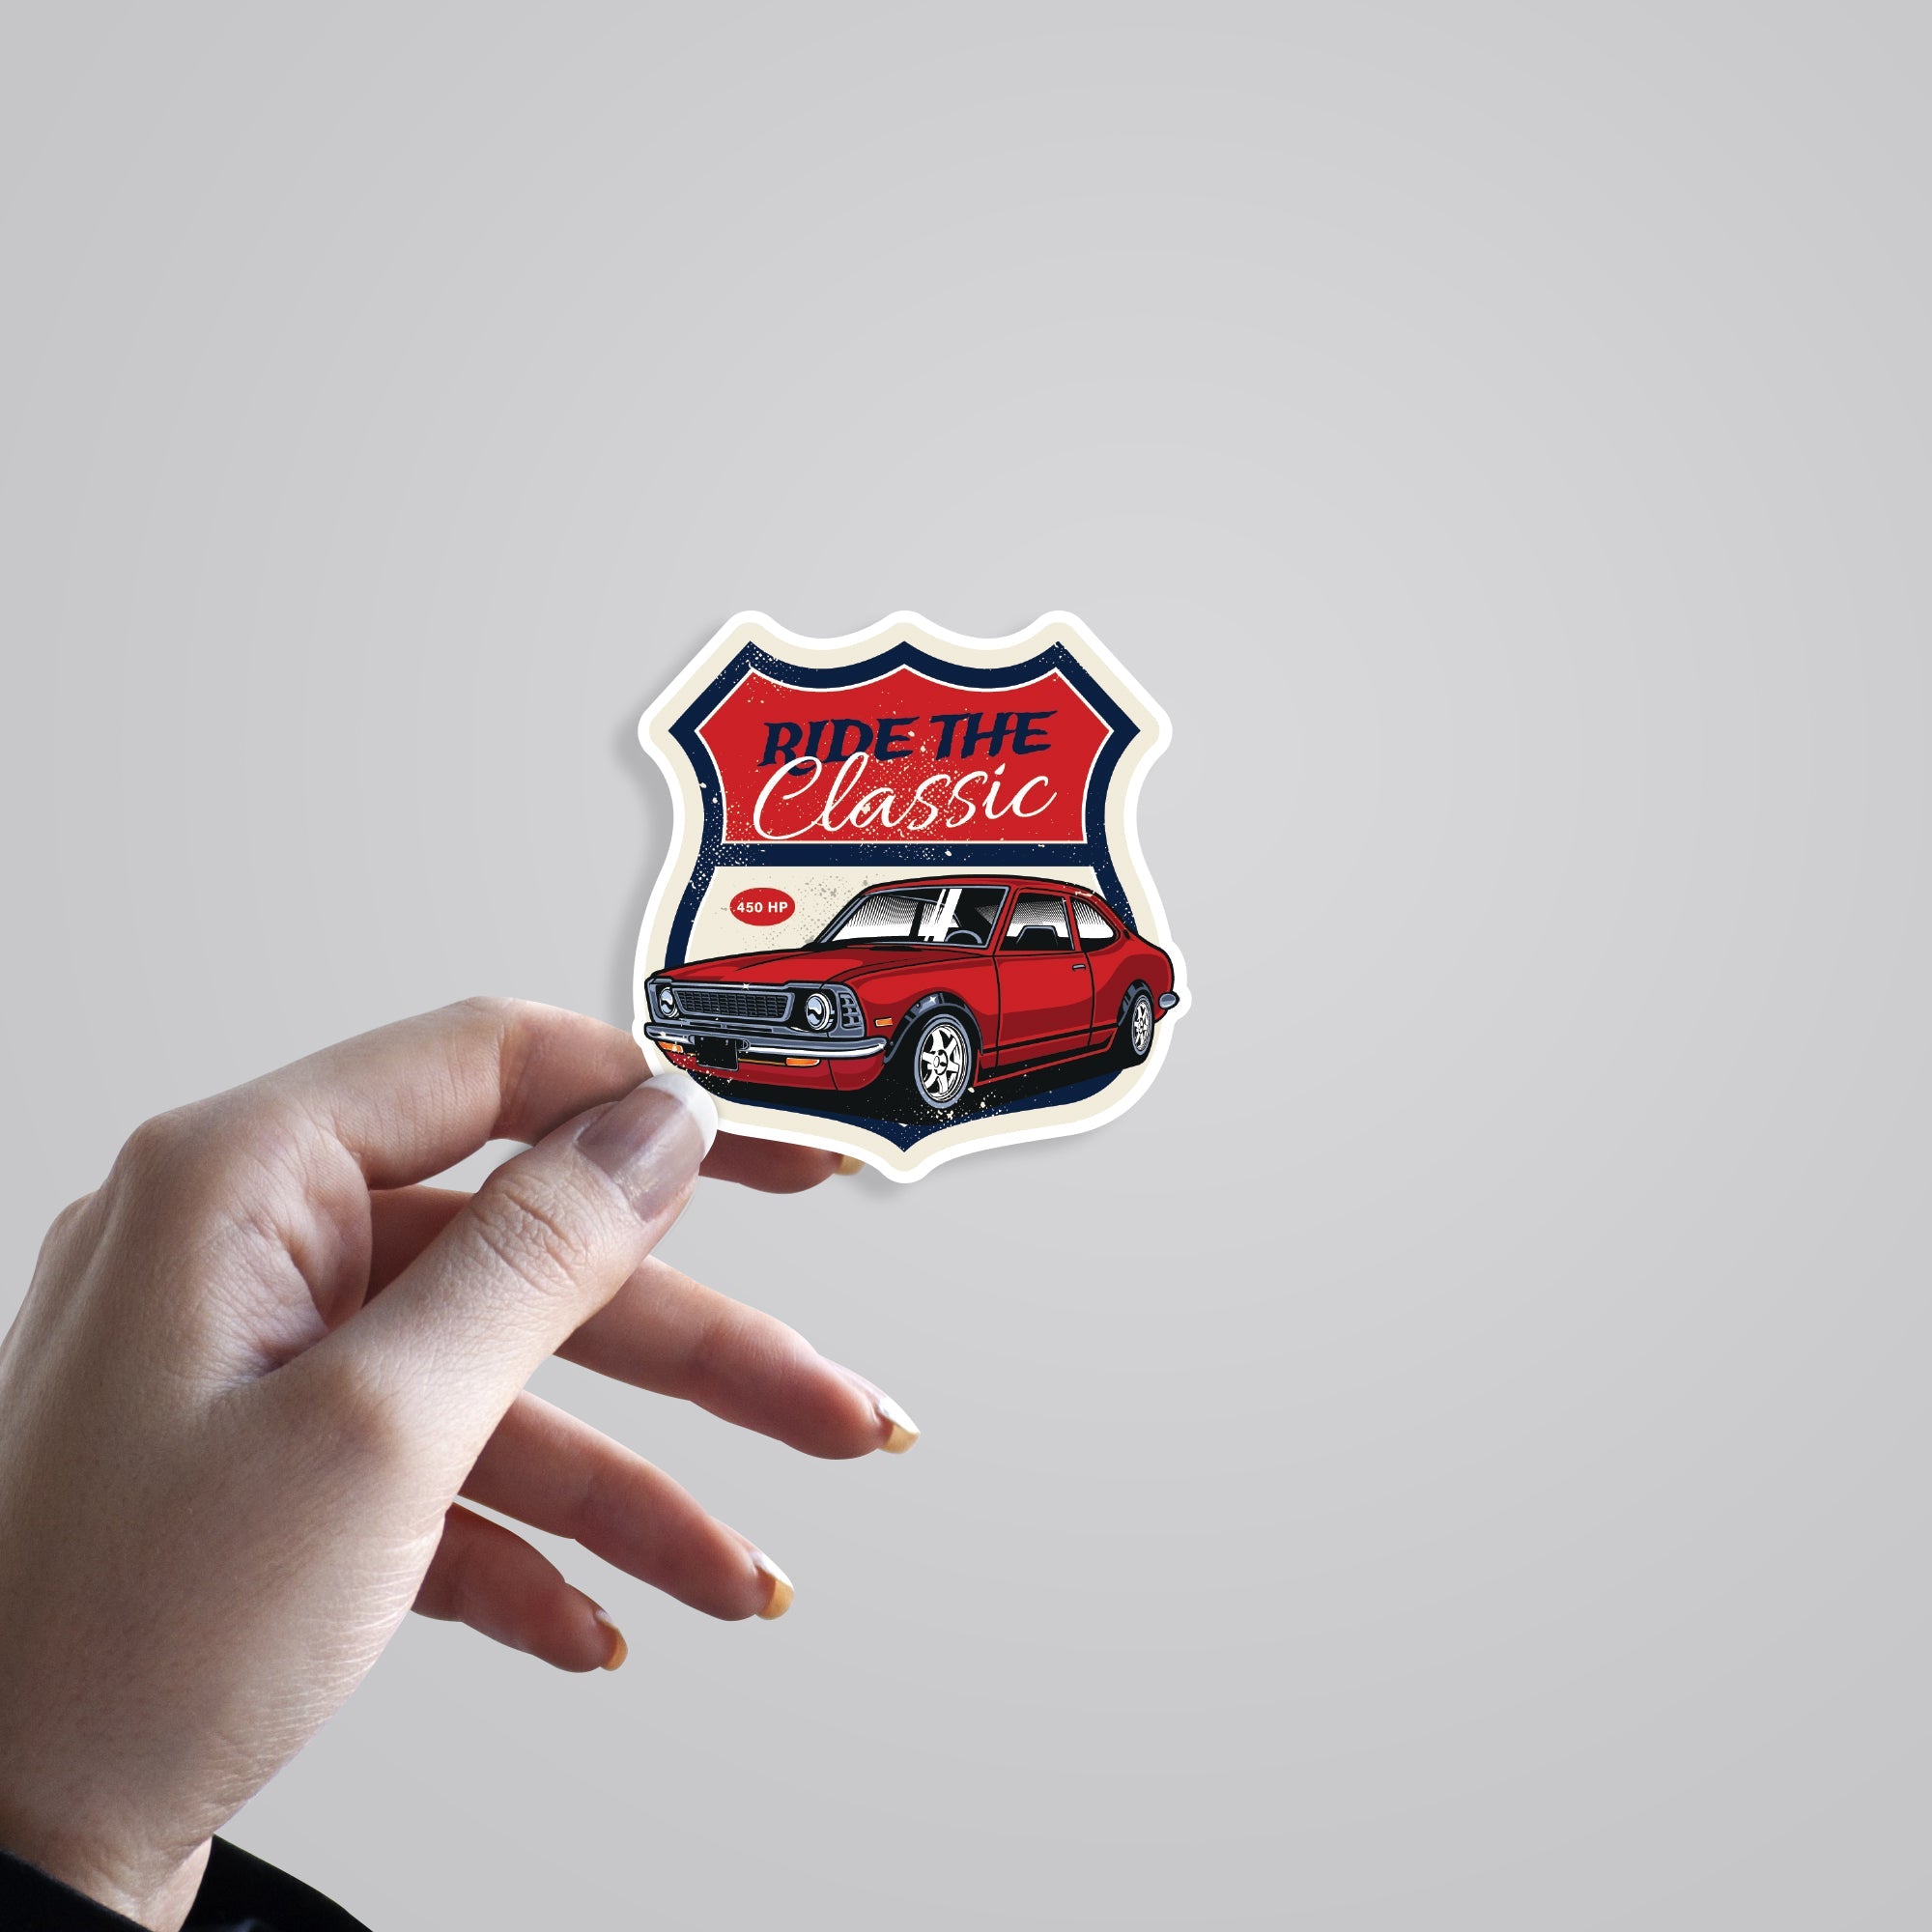 Ride The Classic Cars & Bikes Stickers